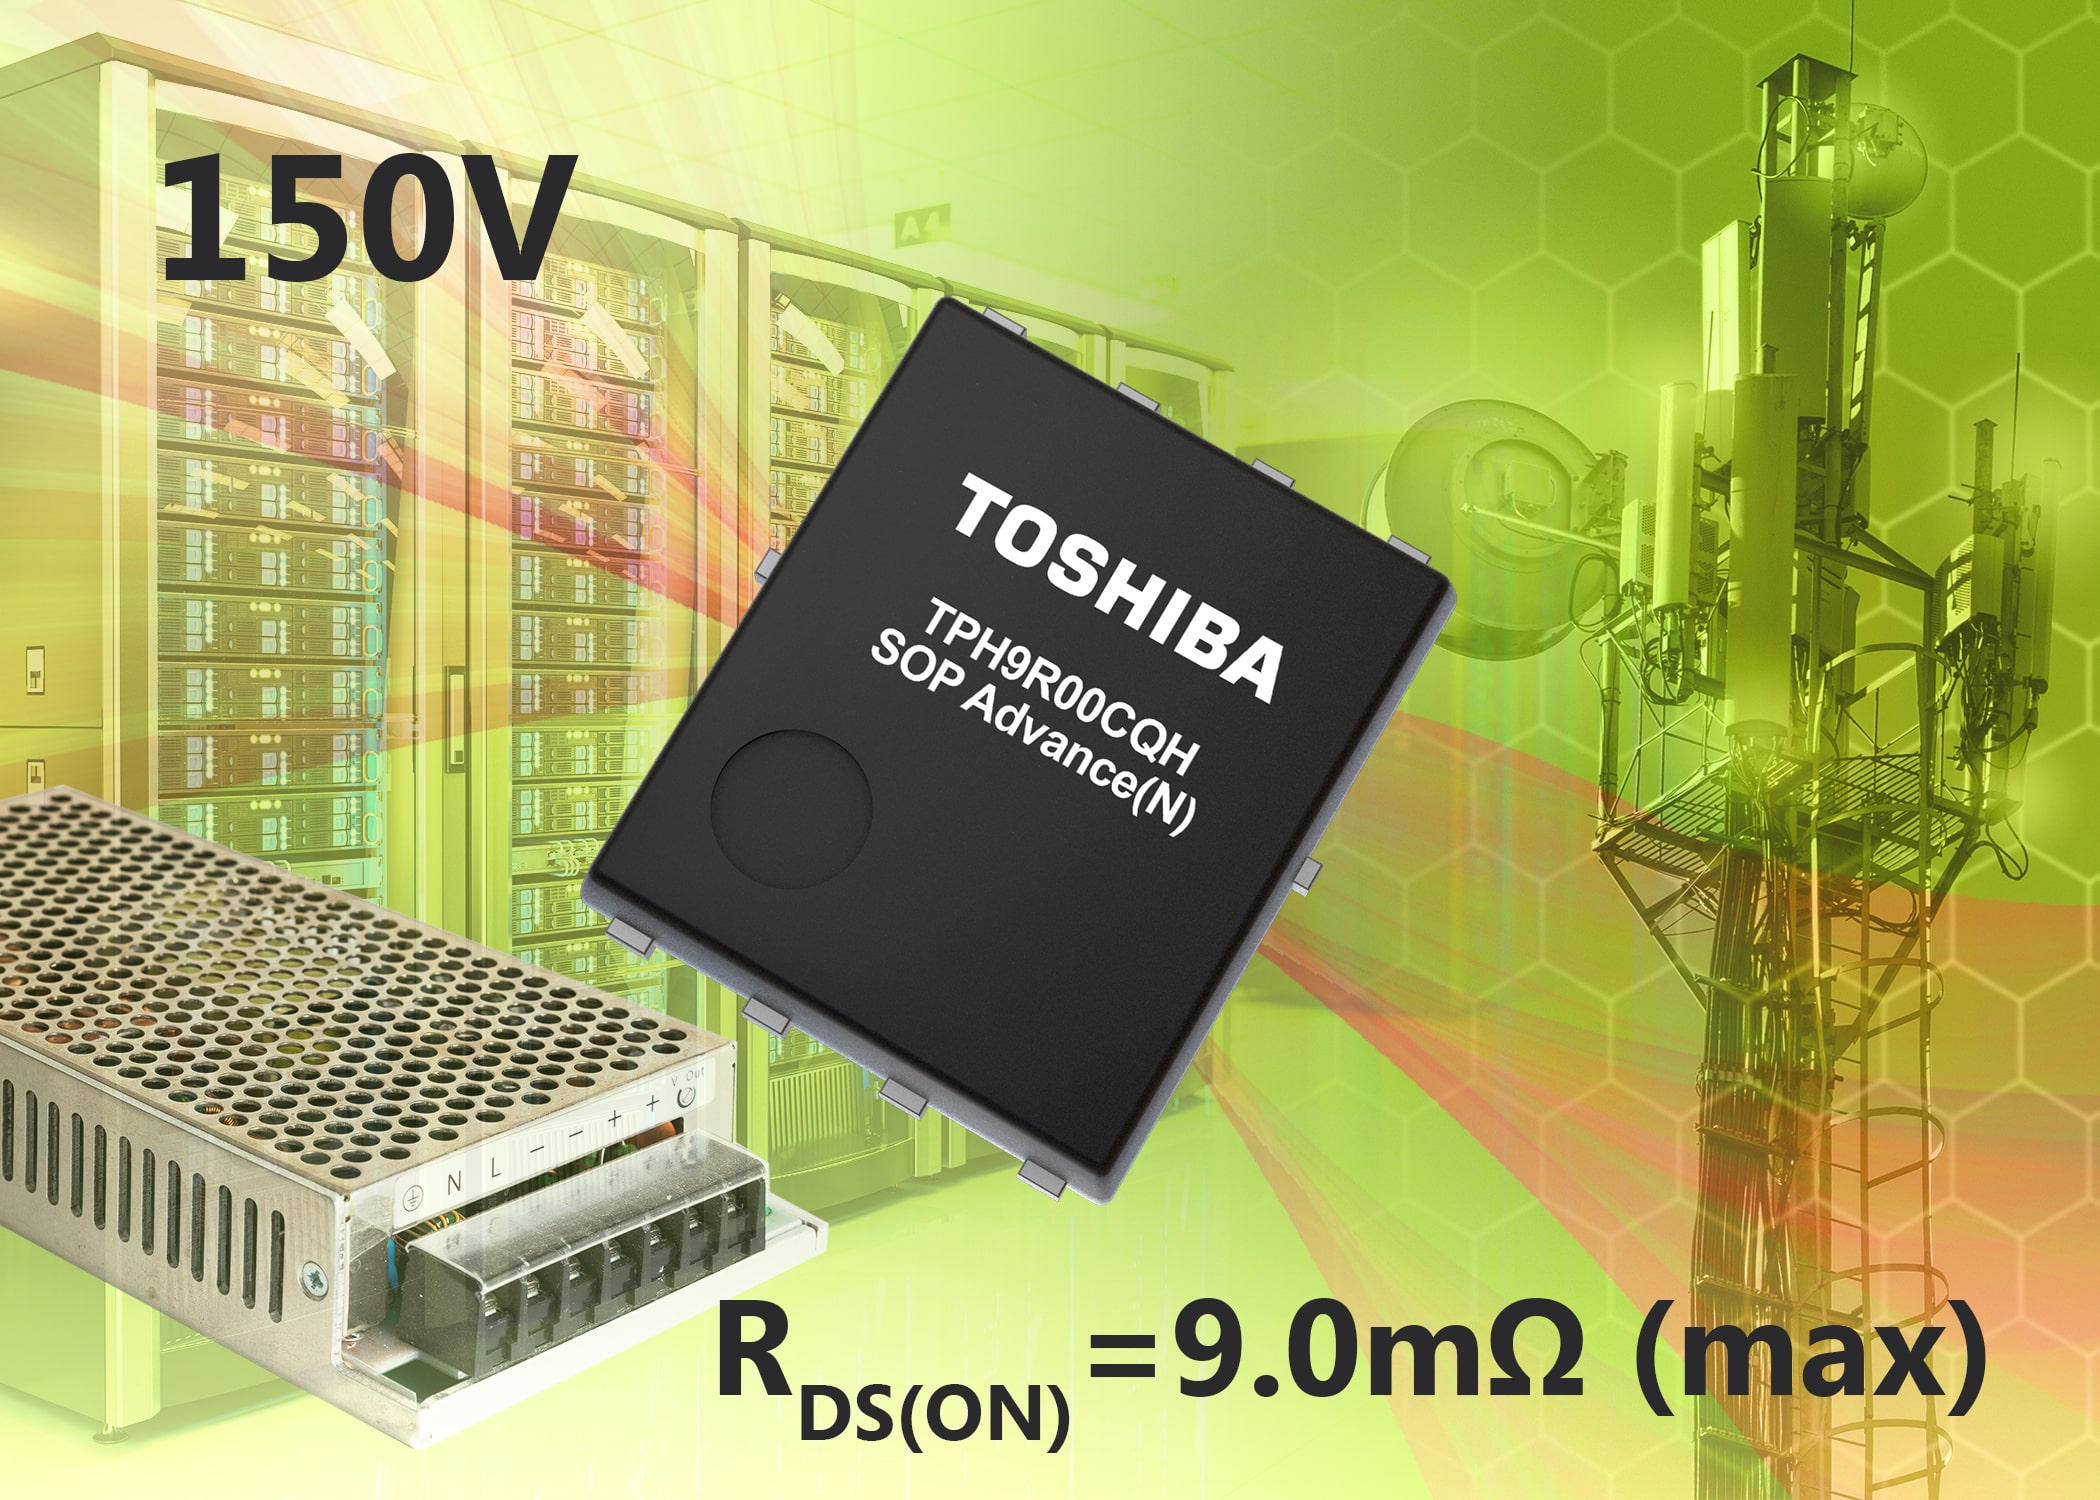 New 150V N-channel power MOSFET improves power supply efficiency